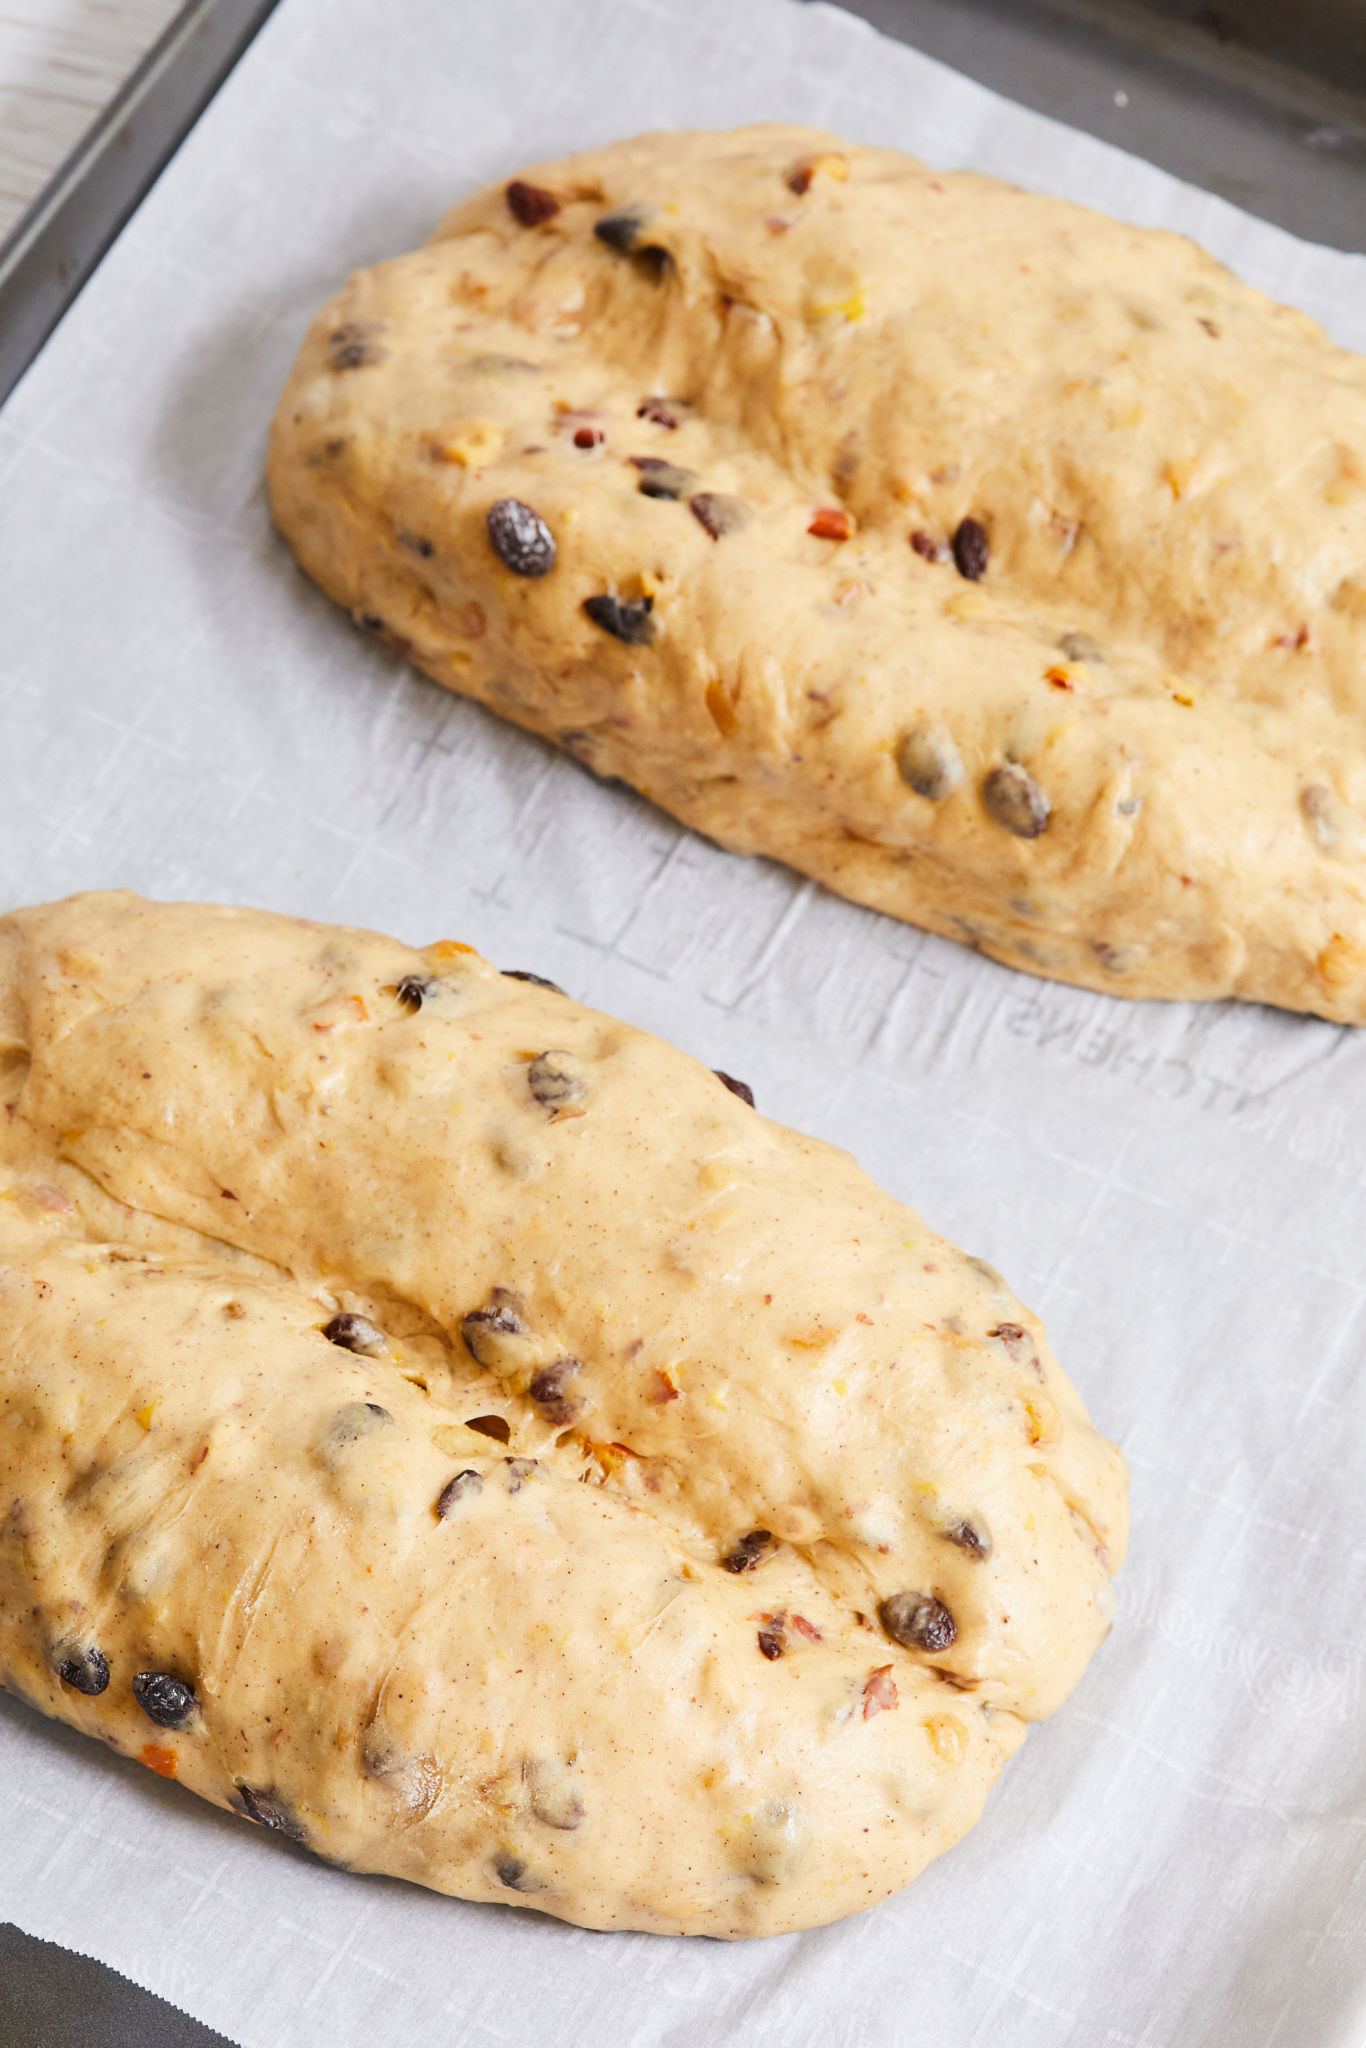 Two loaves of Stollen before baking.